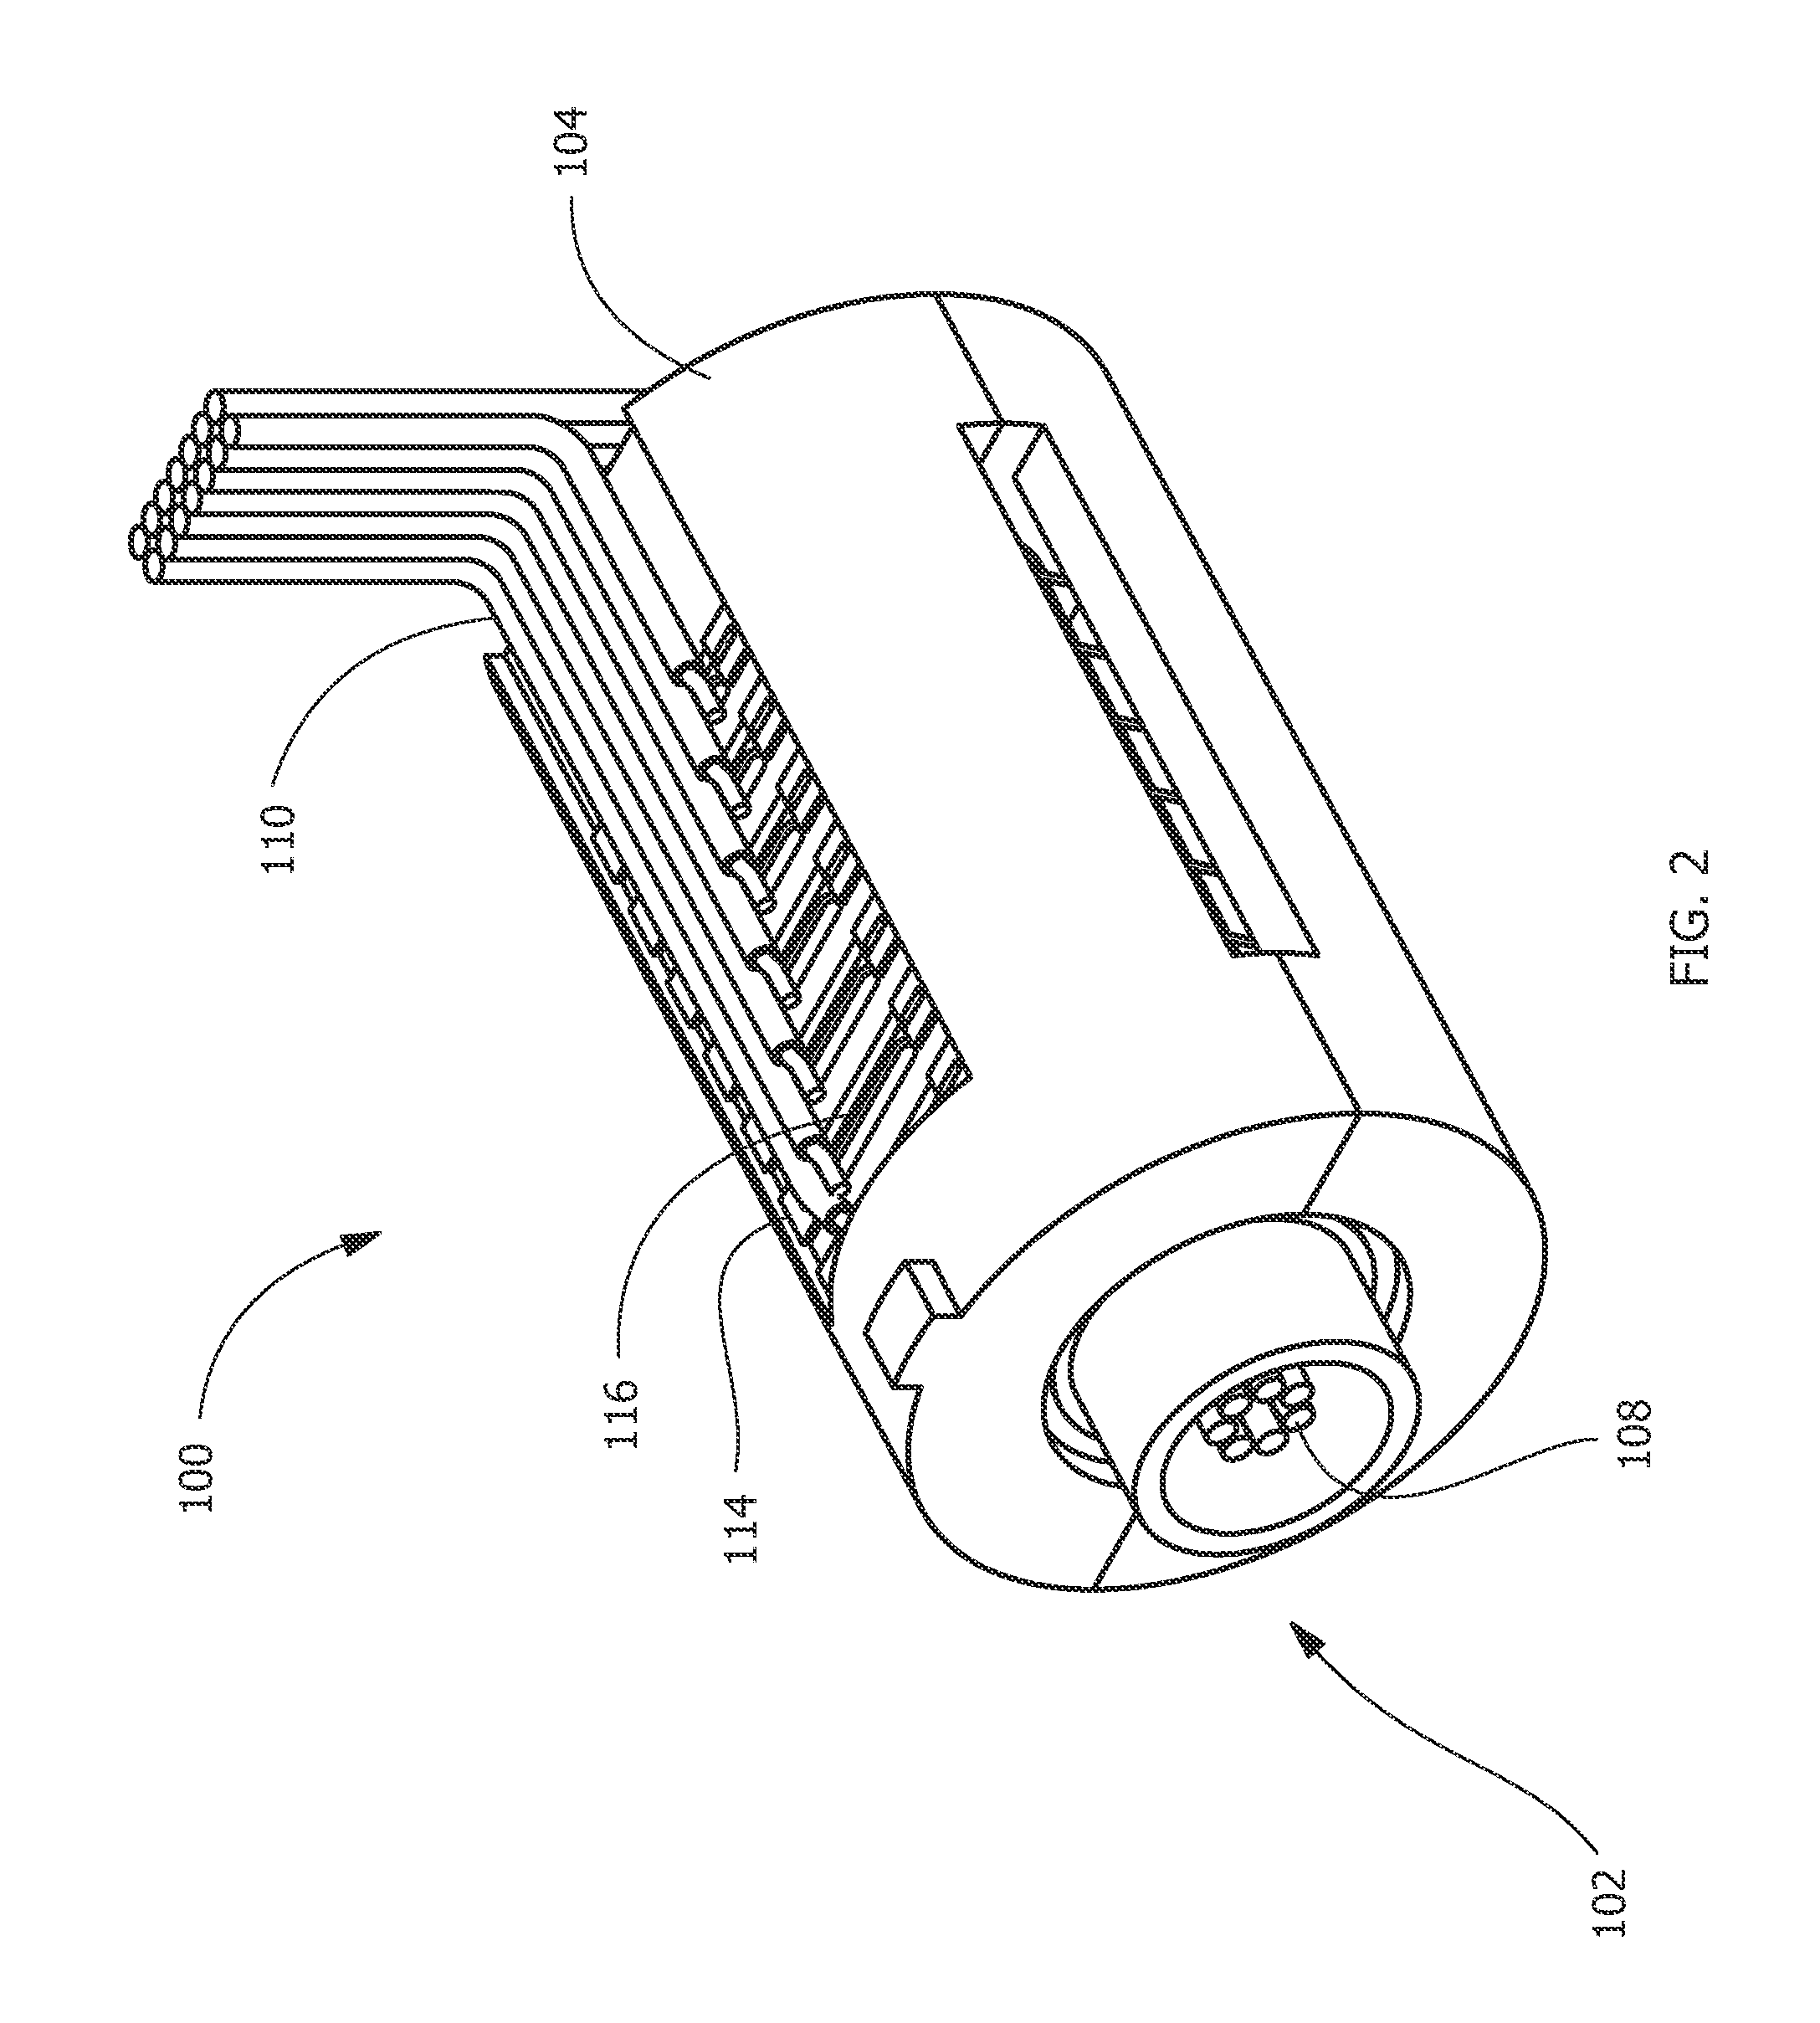 Method of fabricating a slip ring component